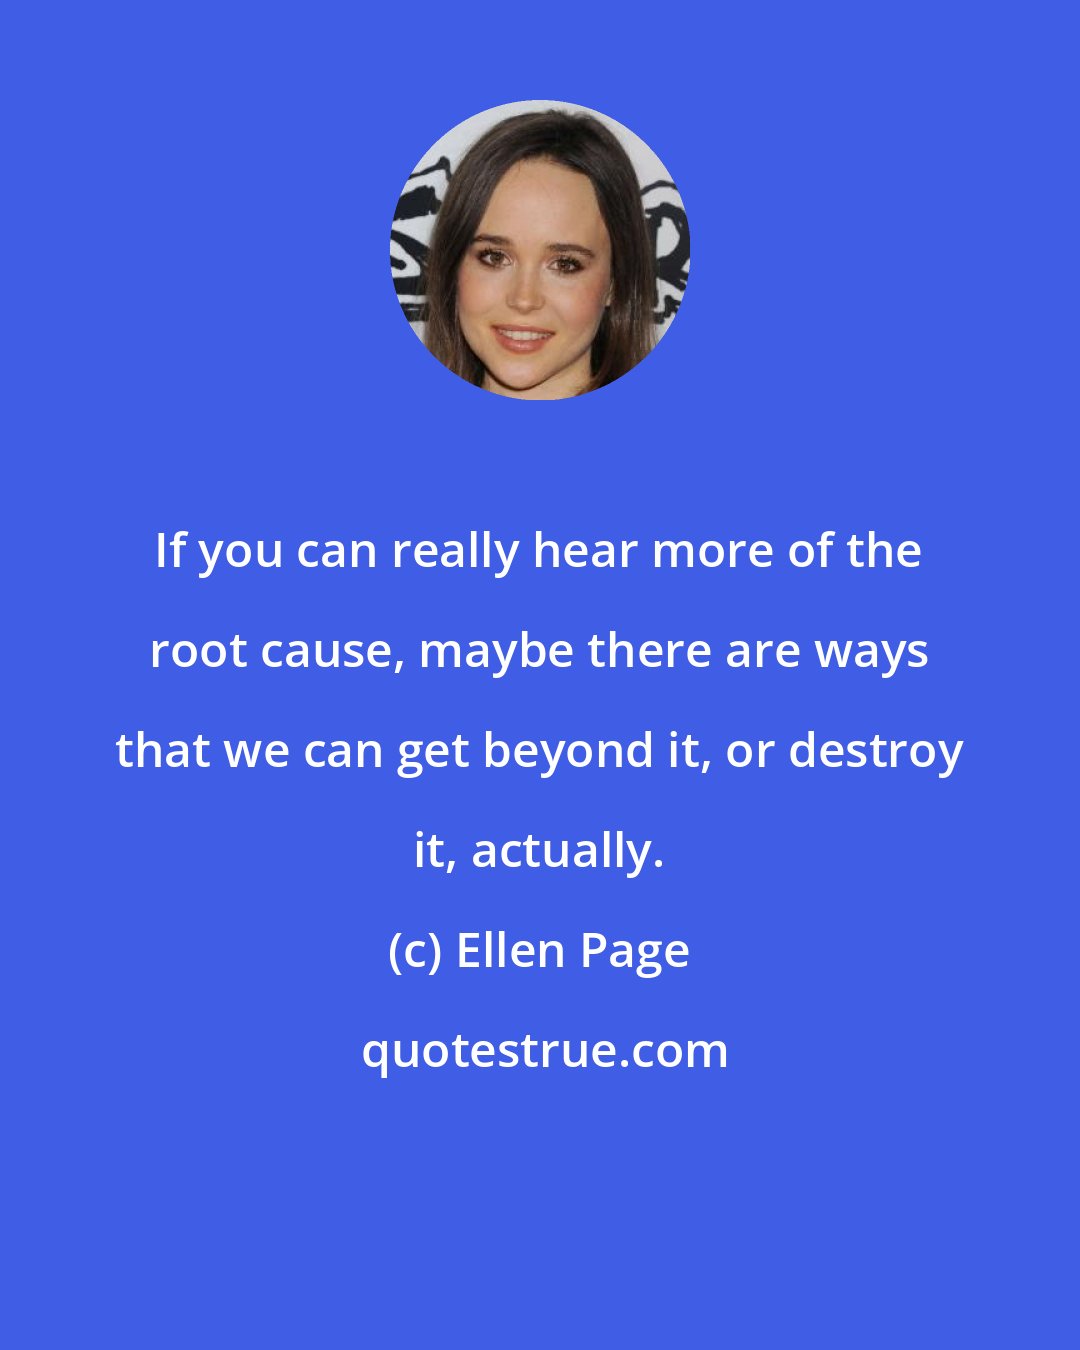 Ellen Page: If you can really hear more of the root cause, maybe there are ways that we can get beyond it, or destroy it, actually.